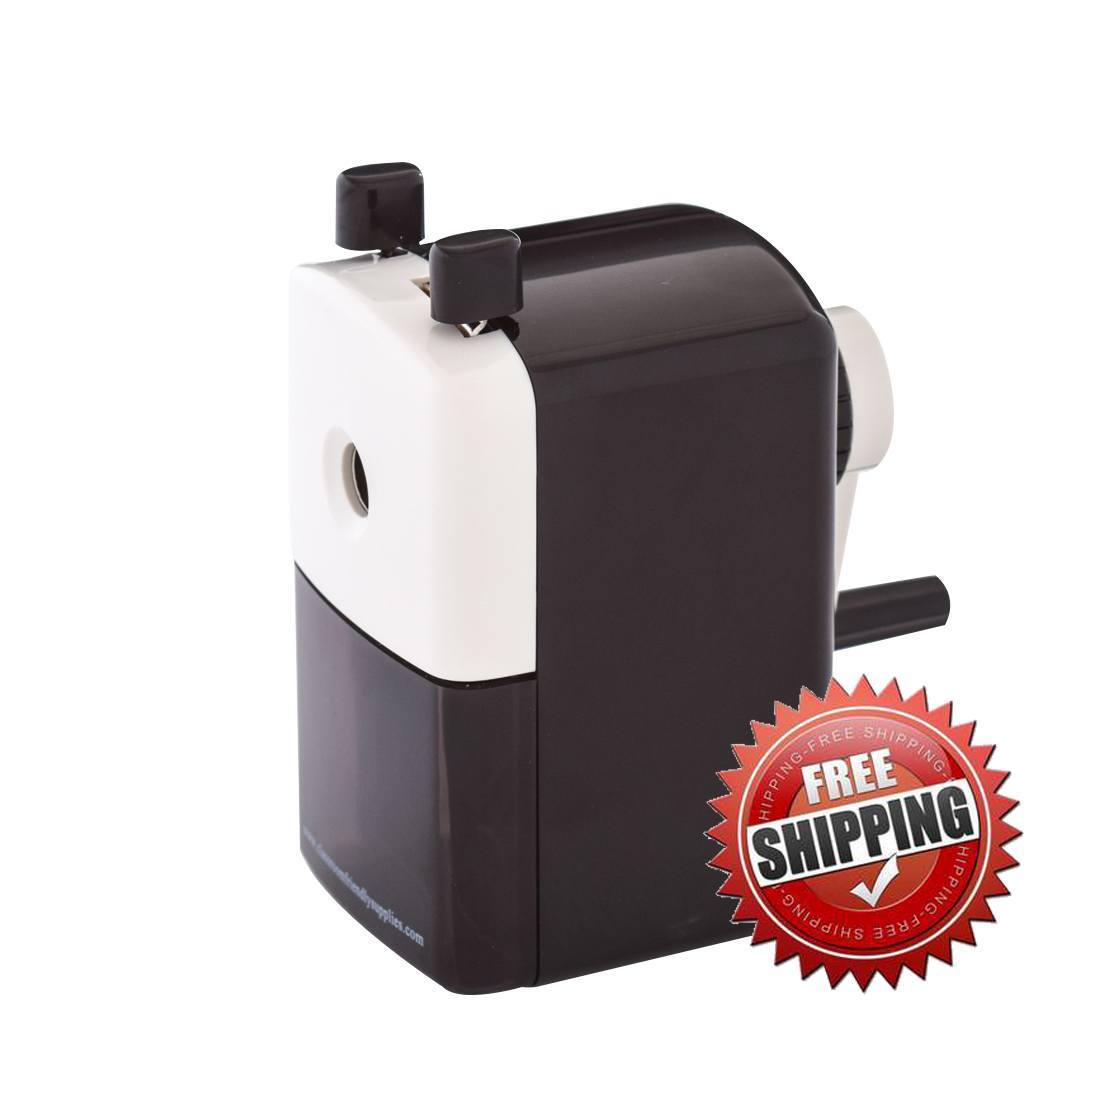 Large Hole Sharpener - Classroom Friendly Supplies
 - 1